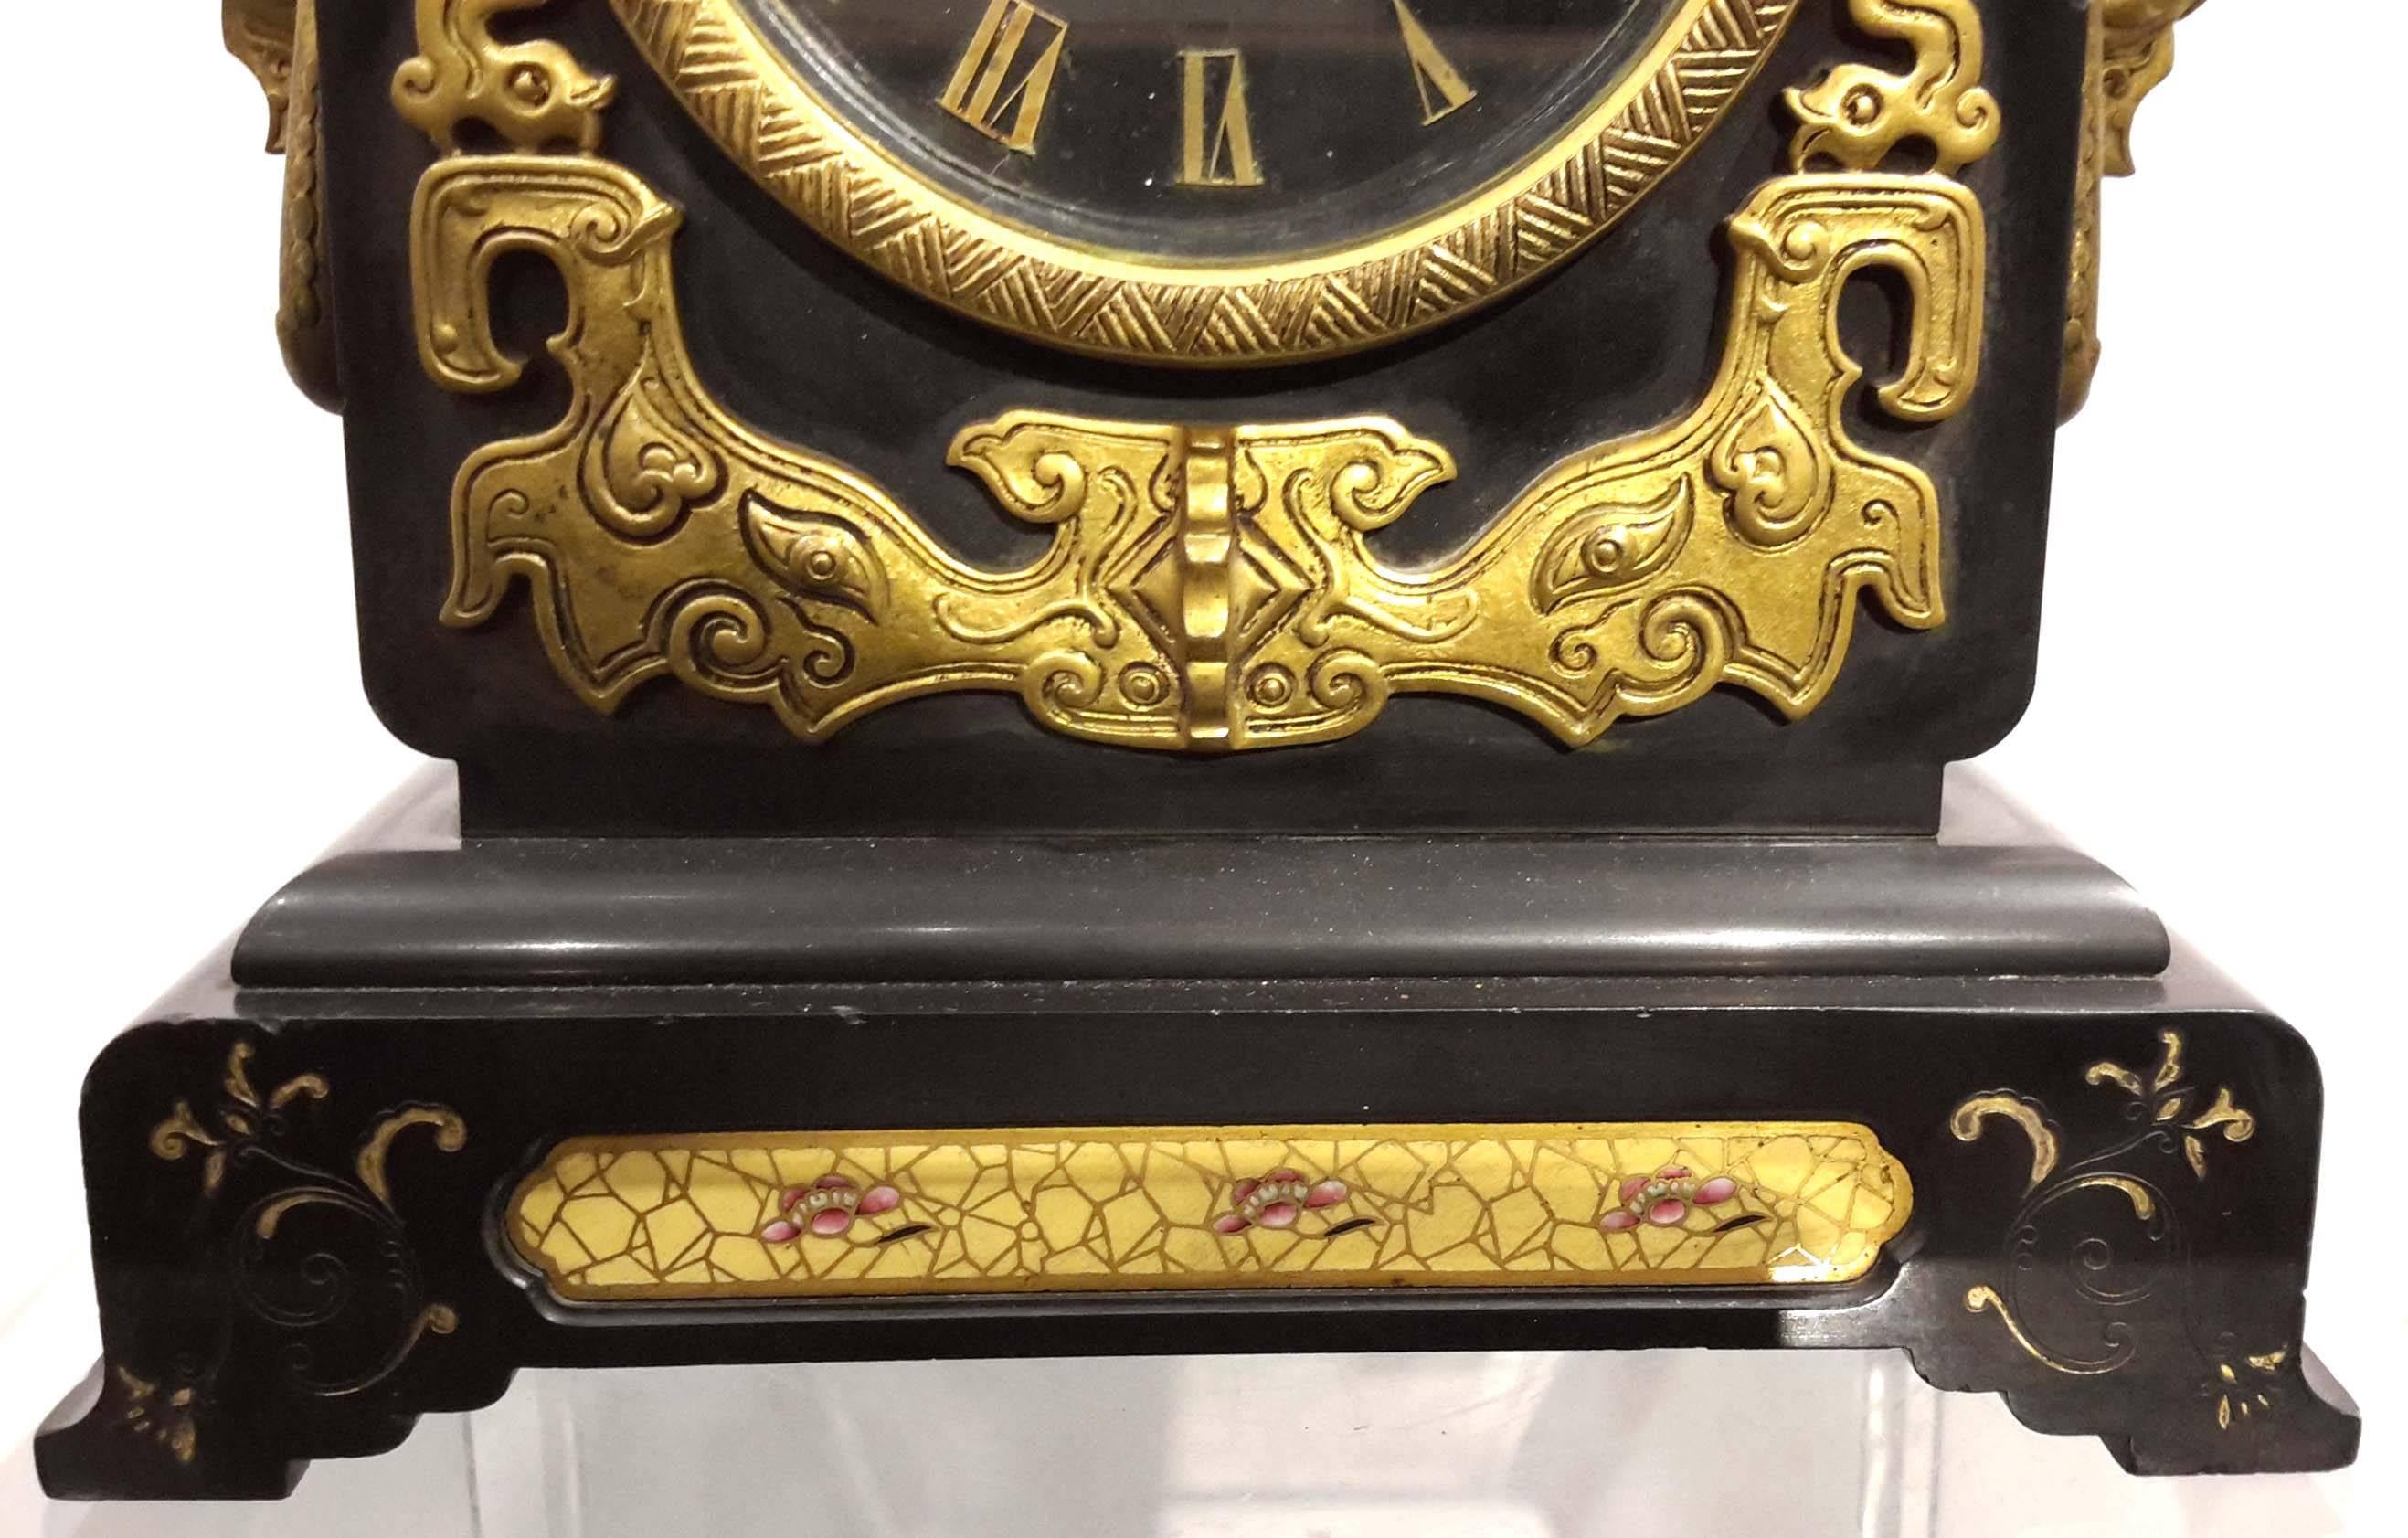 Tiffany New York and Edouard Lievre Japonisme Clock, 19th Century For Sale 5